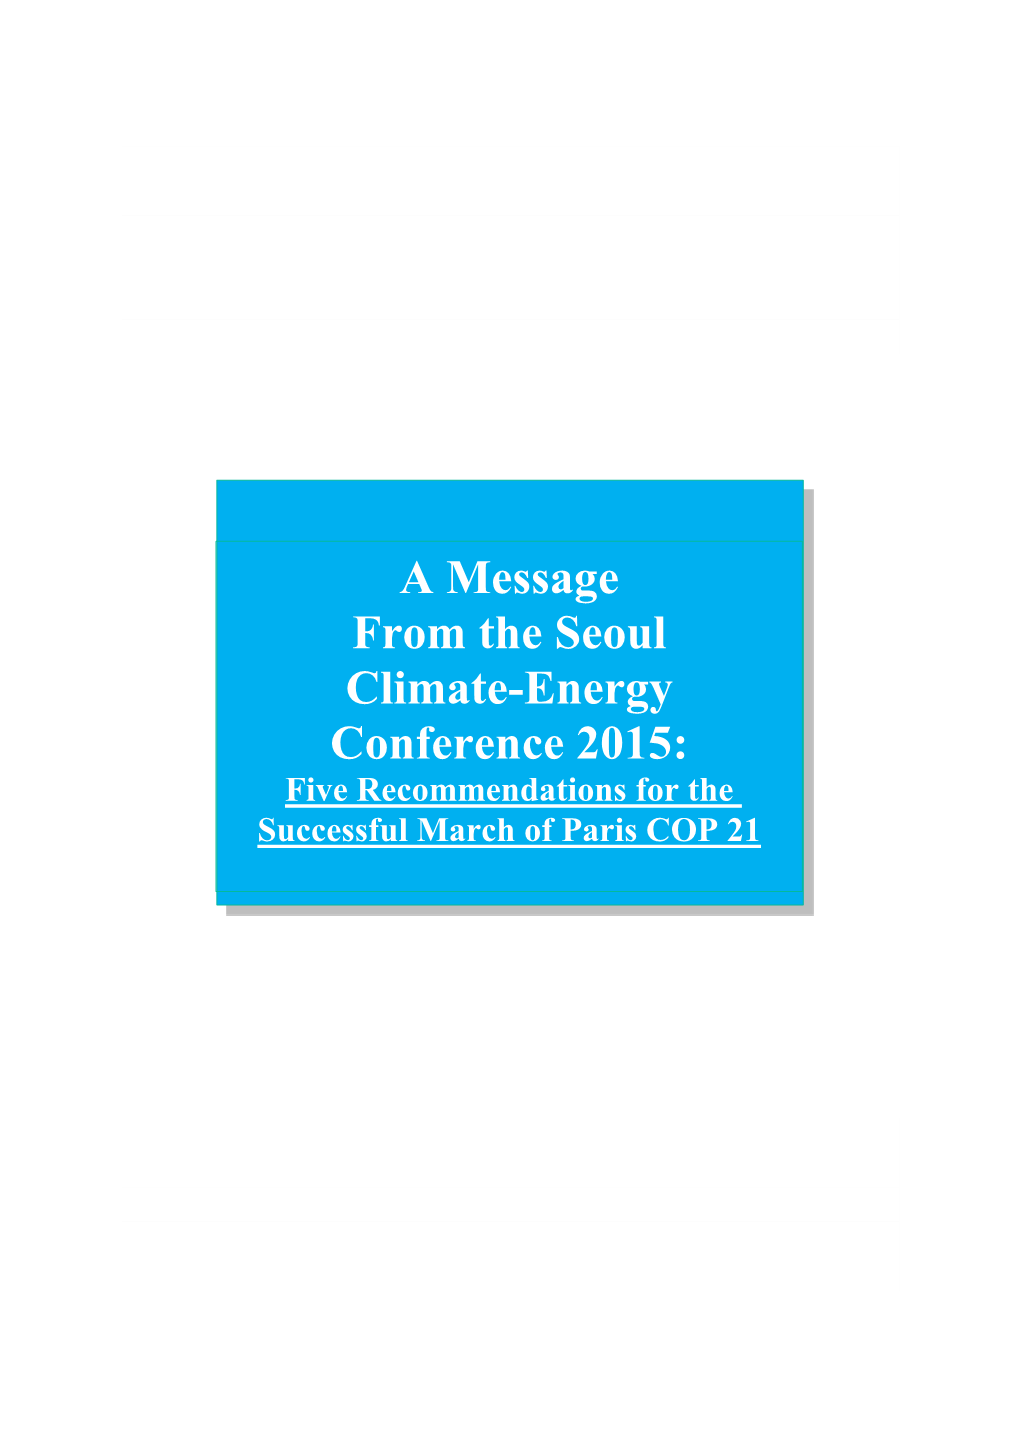 A Message from the Seoul Climate-Energy Conference 2015